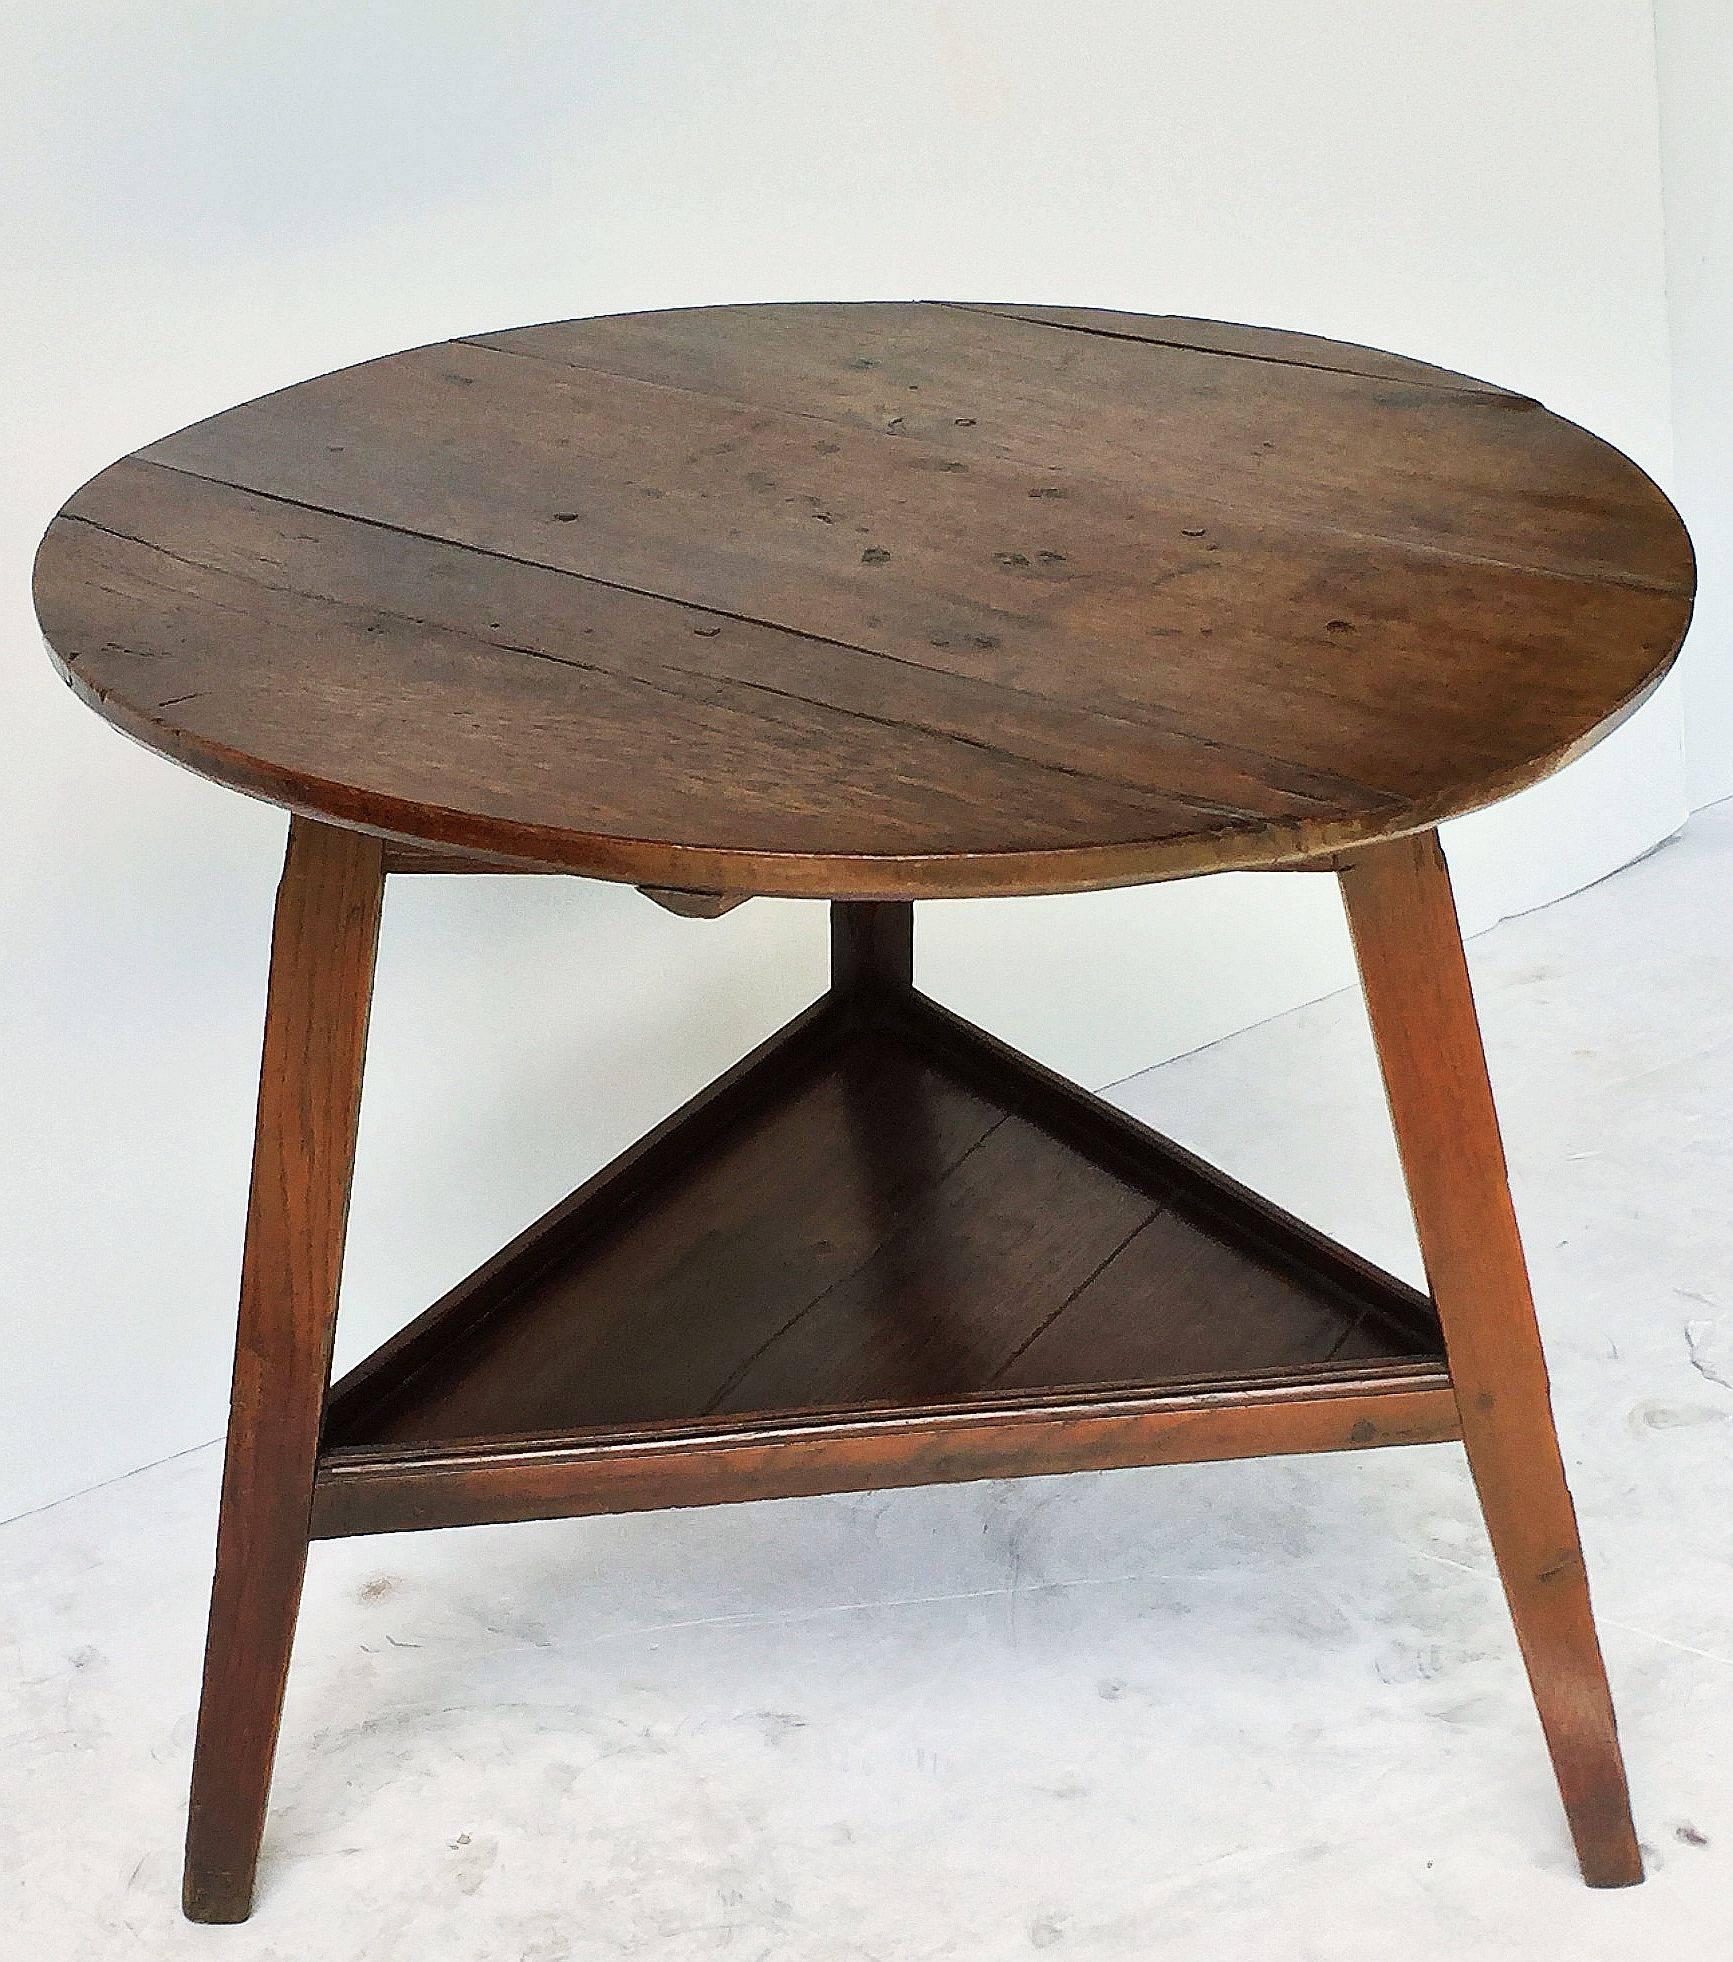 A fine English cricket table of oak featuring the traditional round or circular top over a tripod base triangular under-tier shelf.

Makes a nice occasional table or side table.